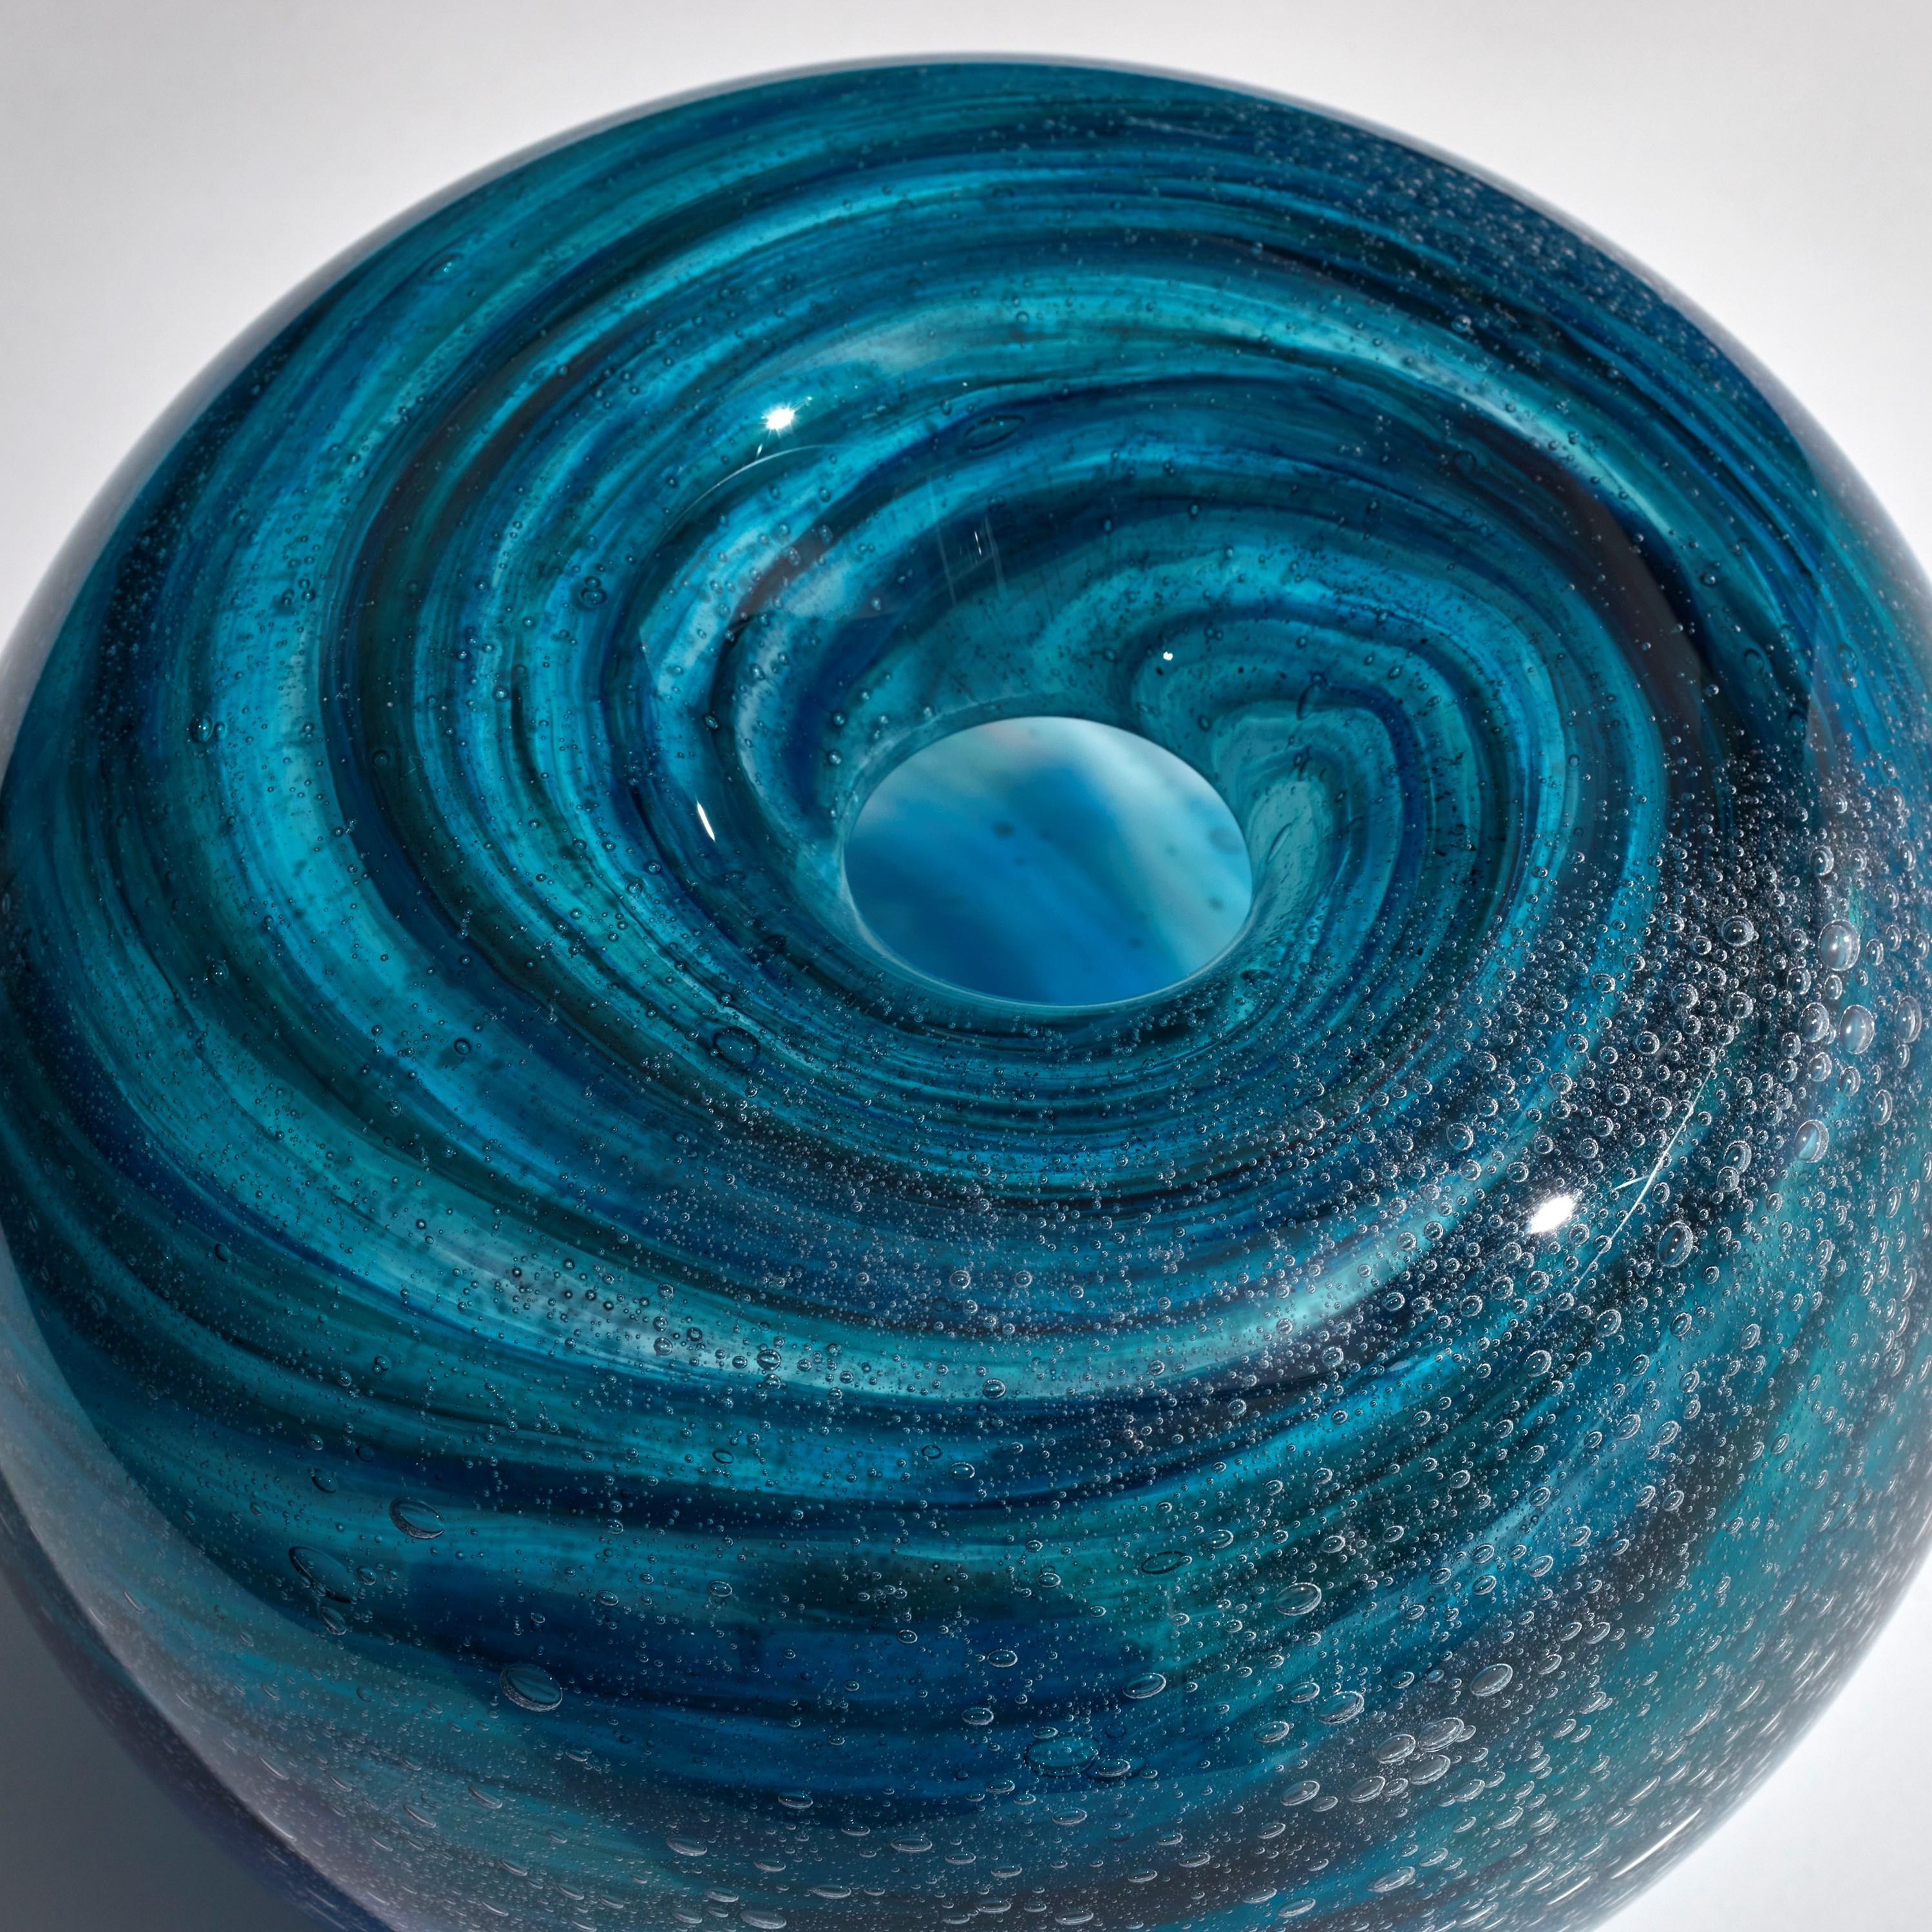 British Maelstrom, Blue & Aqua Glass Sculptural Centrepiece by Cathryn Shilling For Sale